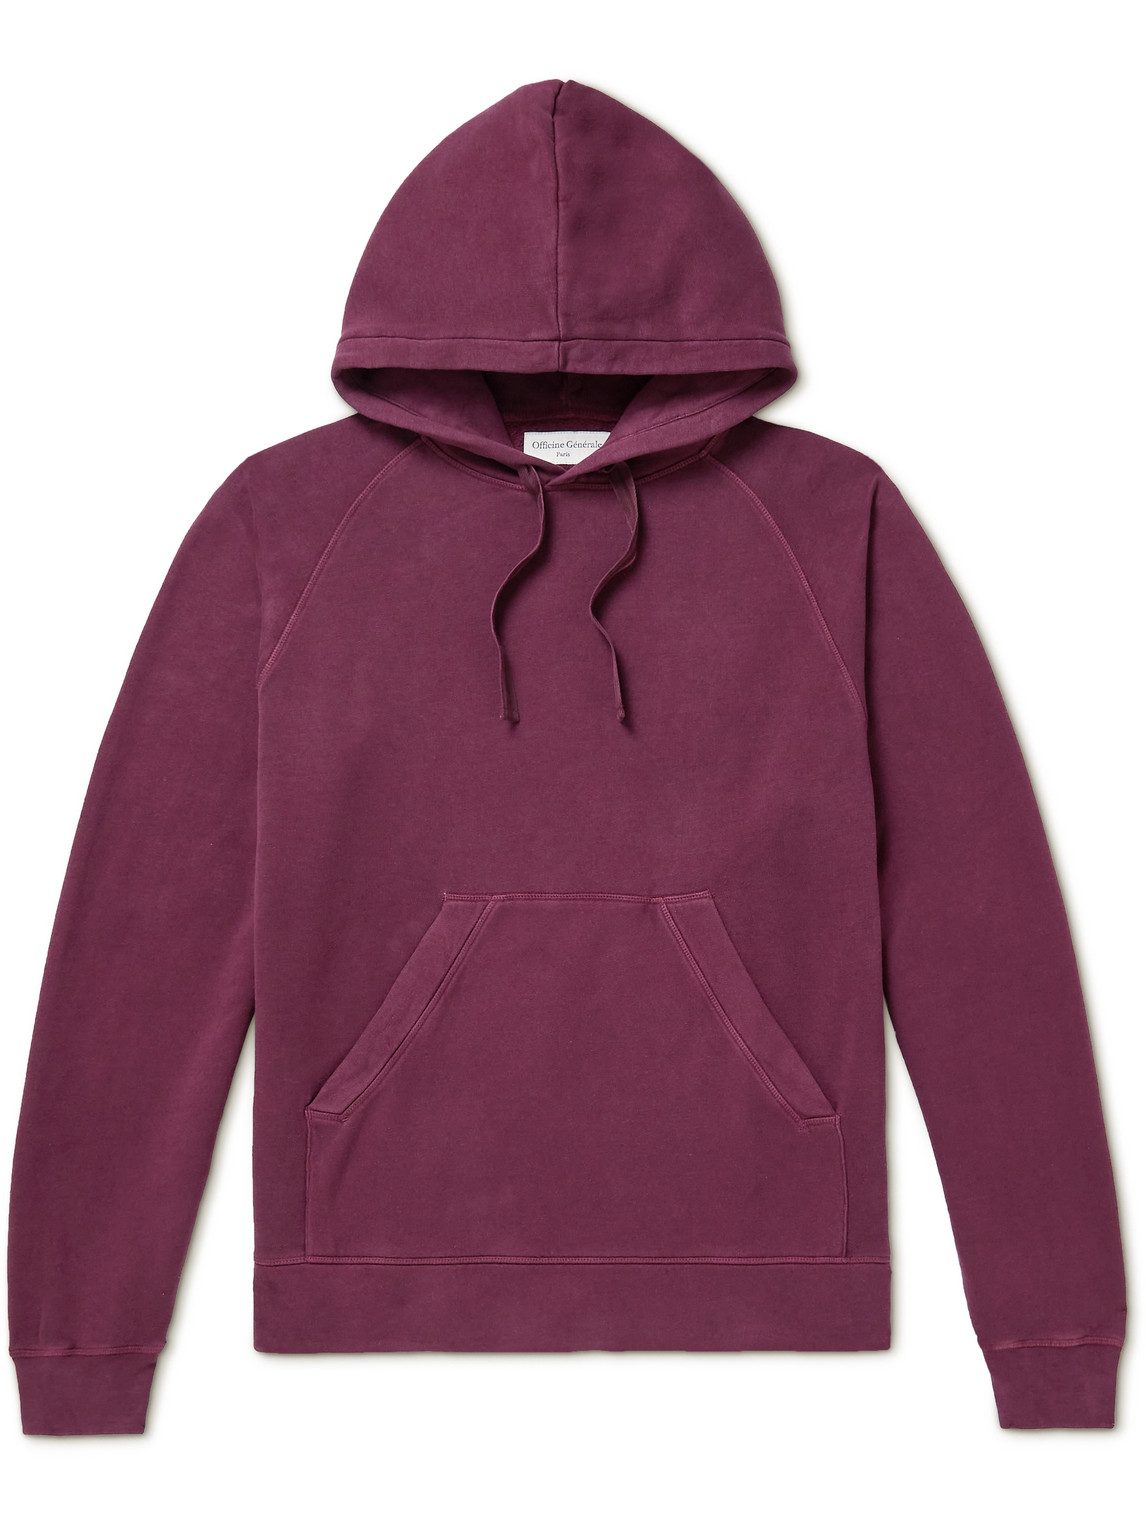 Officine Générale Octave Pigment-Dyed Cotton and TENCEL Lyocell-Blend Jersey Hoodie